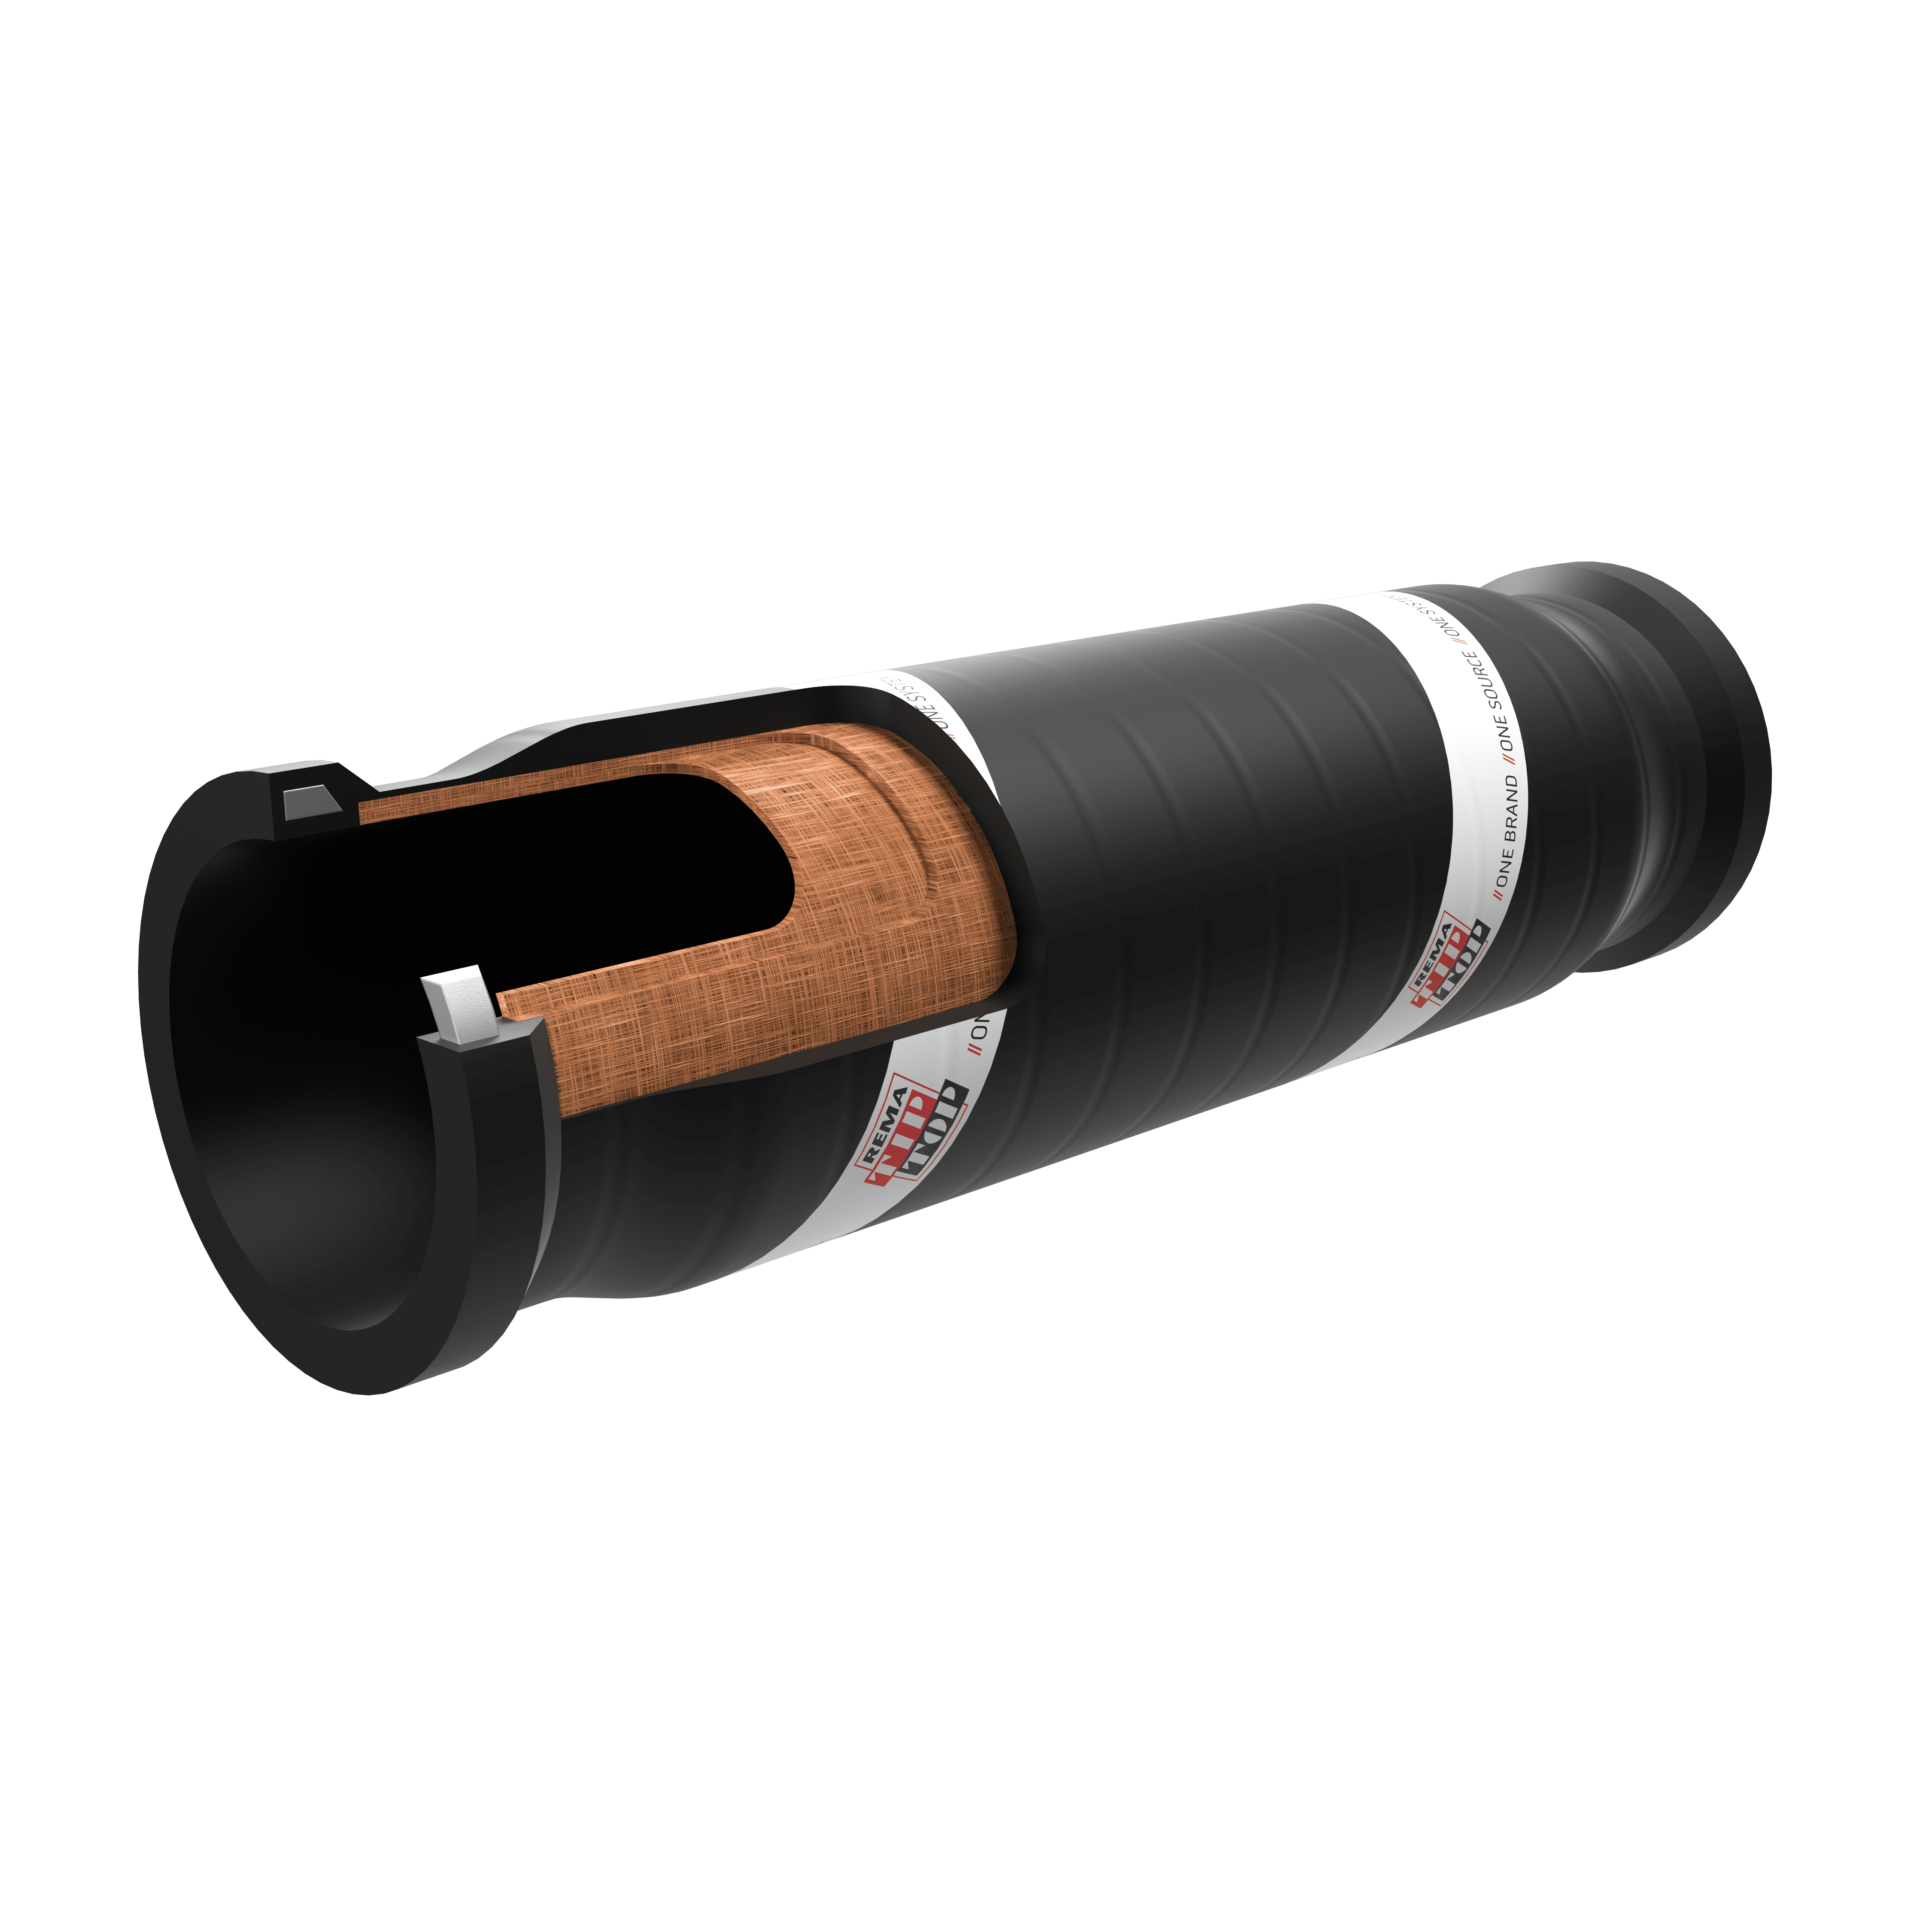 A cross-section of a black cylindrical object, resembling a Hard-Wall Reducer Hose, reveals a layered interior, including a wooden layer and a dark, ribbed outer shell. Labels with text are visible on the outer surface.